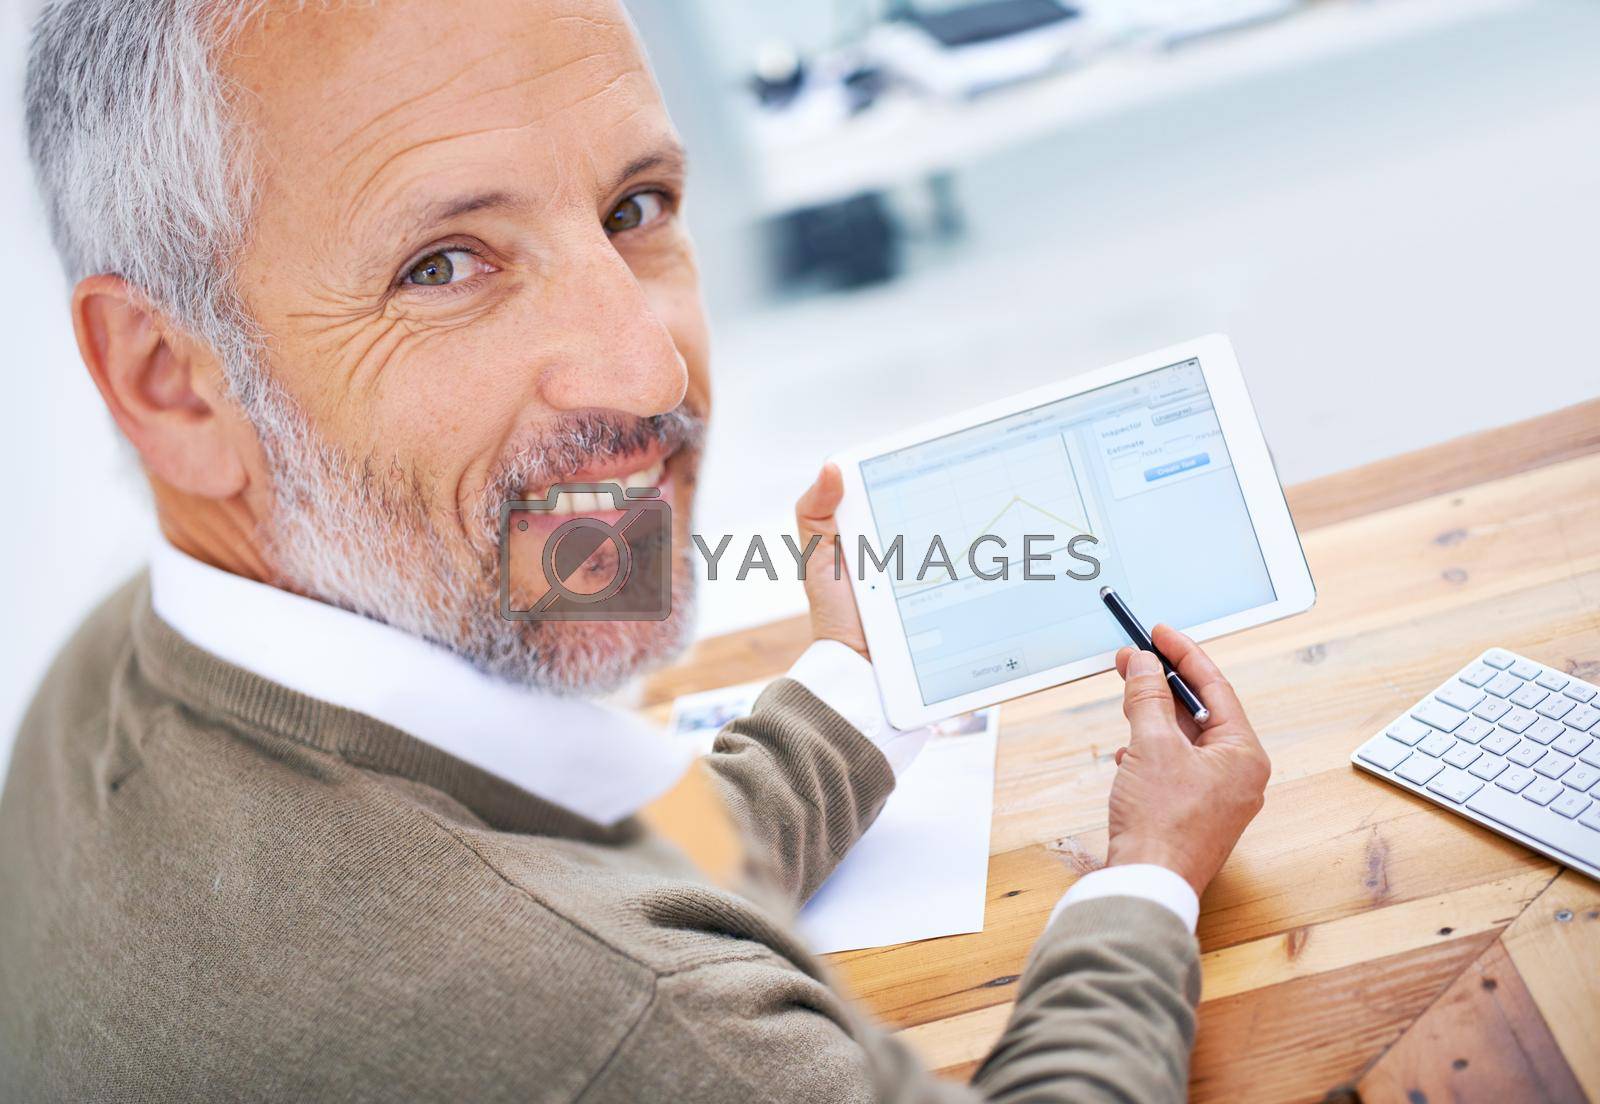 A portrait of a happy businessman using a tablet at his desk.